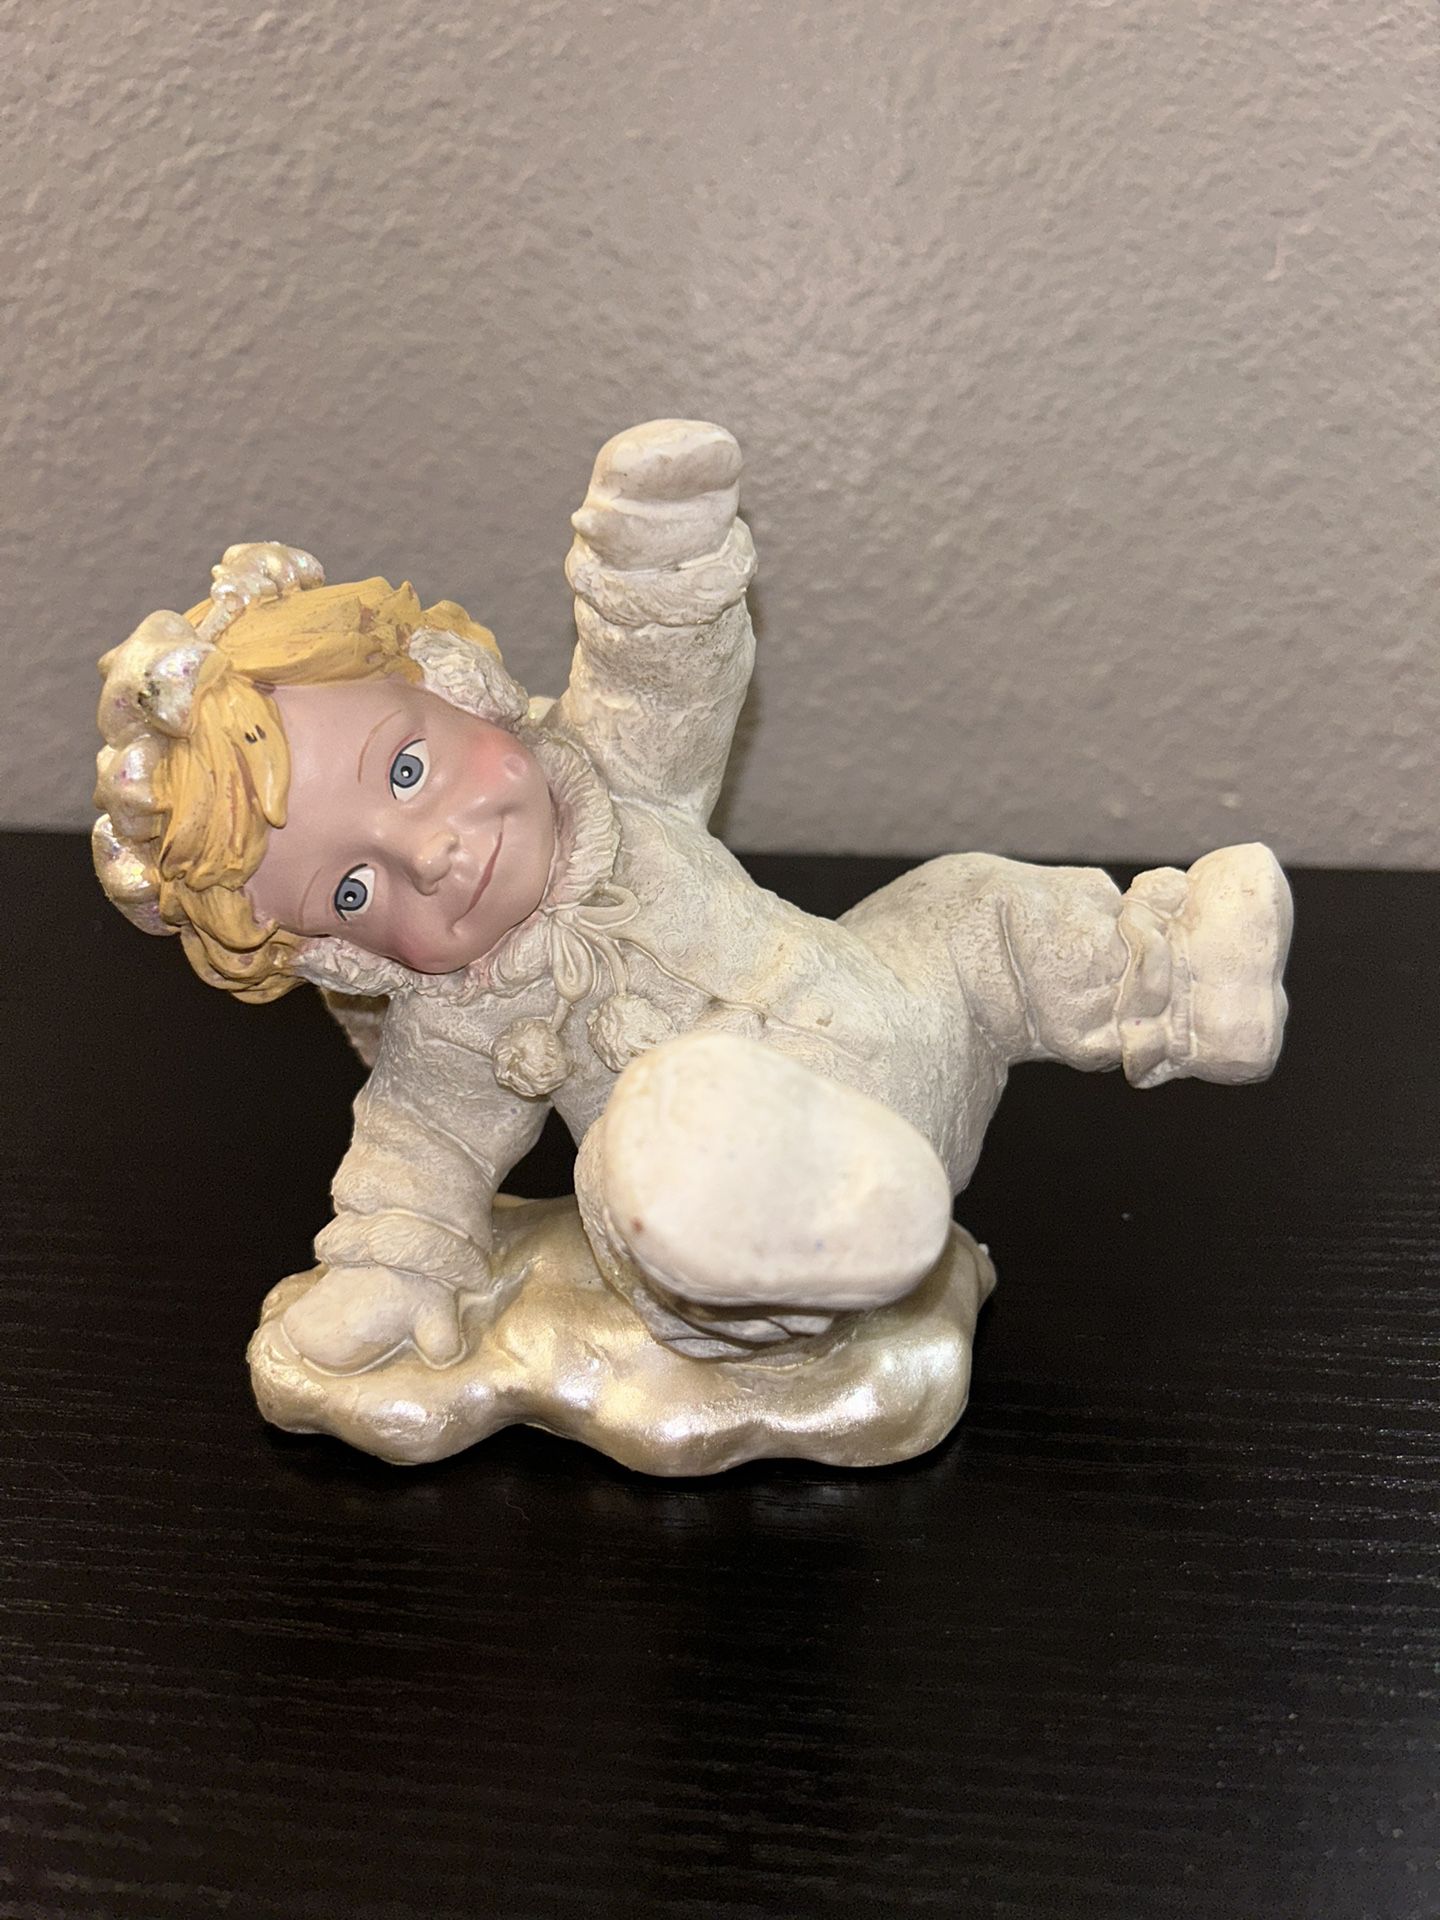 Vintage Snow Angel Figurine 1994 Beige with Sparkles Playing on Ground 5x7”